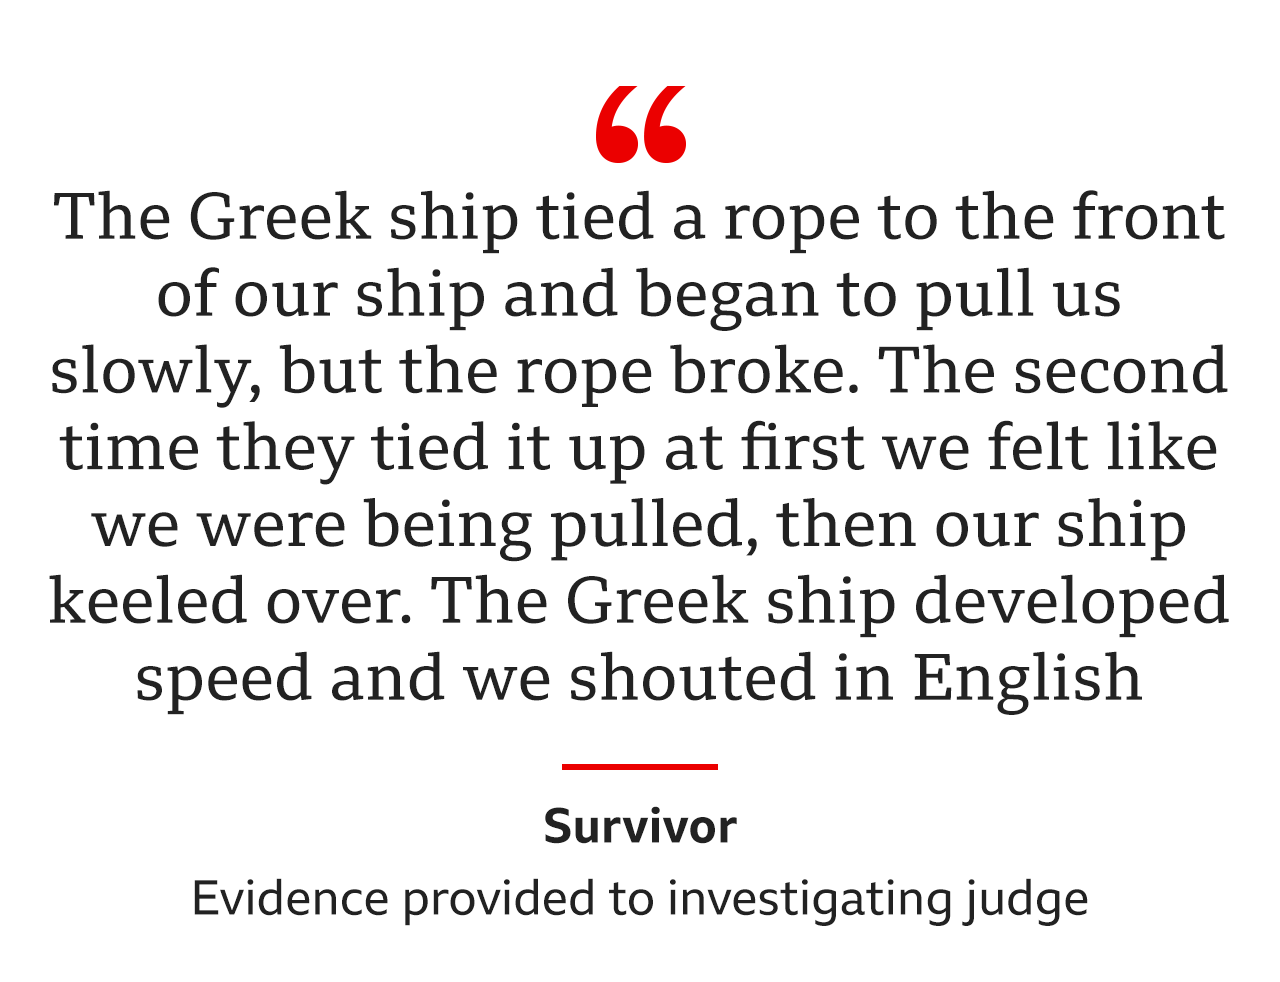 The Greek ship tied a rope to the front of our ship and began to pull us slowly, but the rope broke… The second time they tied it up at first we felt like we were being pulled, then our ship keeled over. The Greek ship developed speed and we shouted in English, was the evidence from the same survivor to an investigating judge